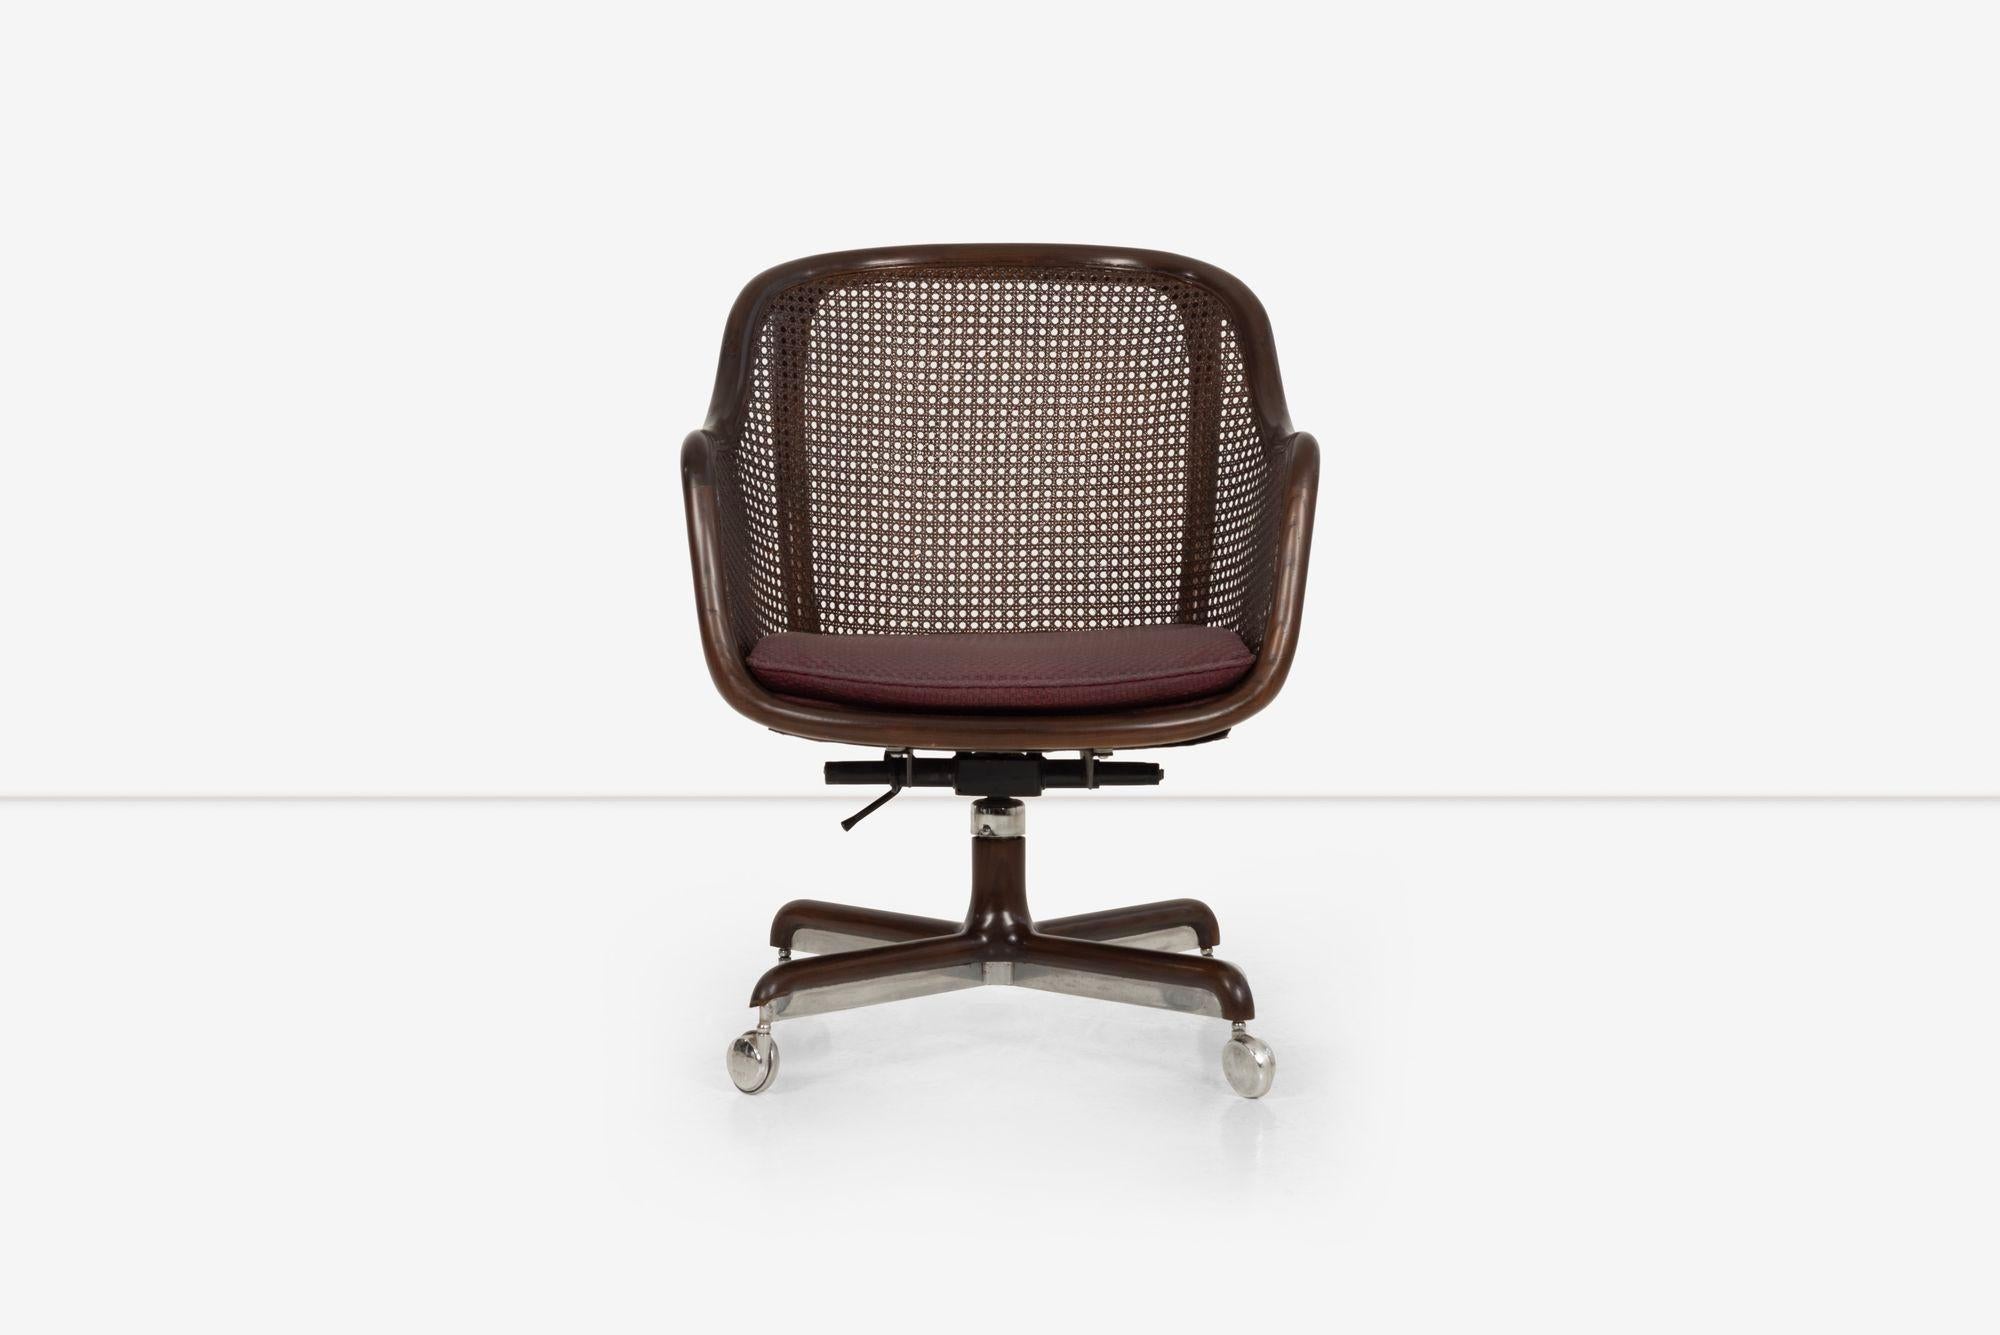 Leather Ward Bennett Office Chair, stained caned meshed between solid stained ashwood structure, tilt/swivel desk chair designed by Ward Bennett for Brickel. Solid chrome and wood base structural base with shepherd chrome casters. Woven vinyl